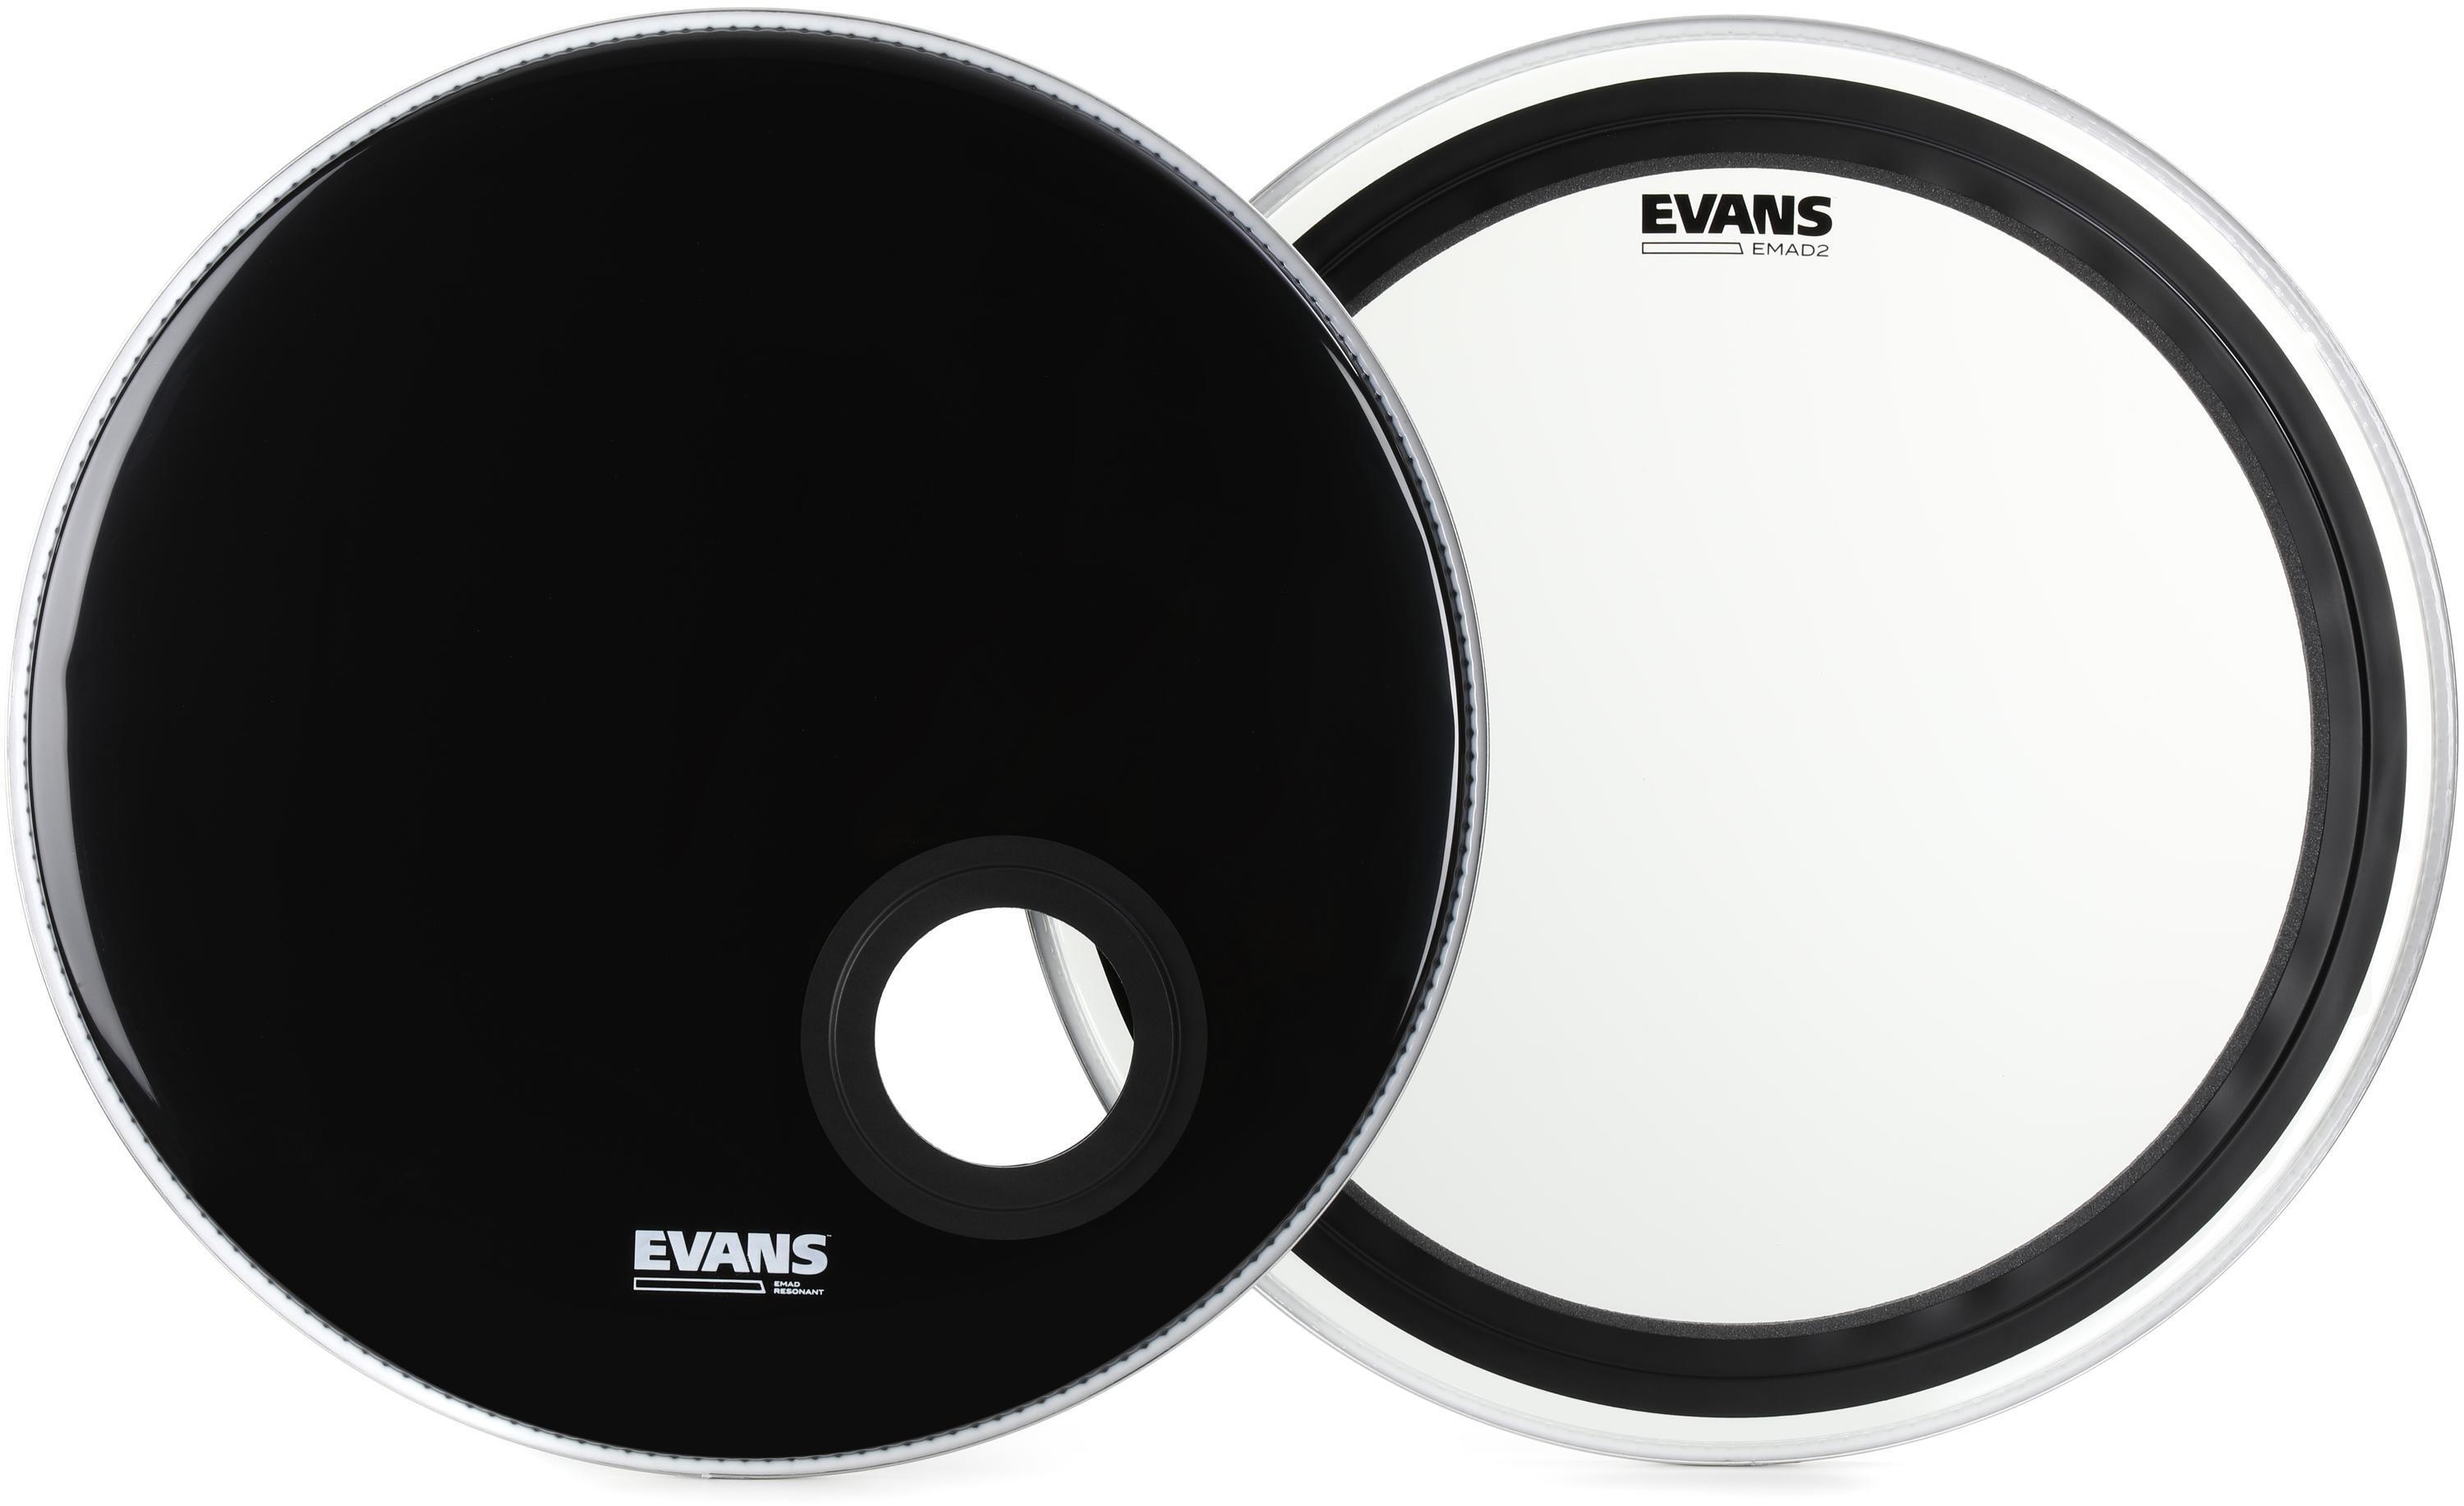 Evans EMAD2 Bass Drum System Bundle - 22-inch | Sweetwater